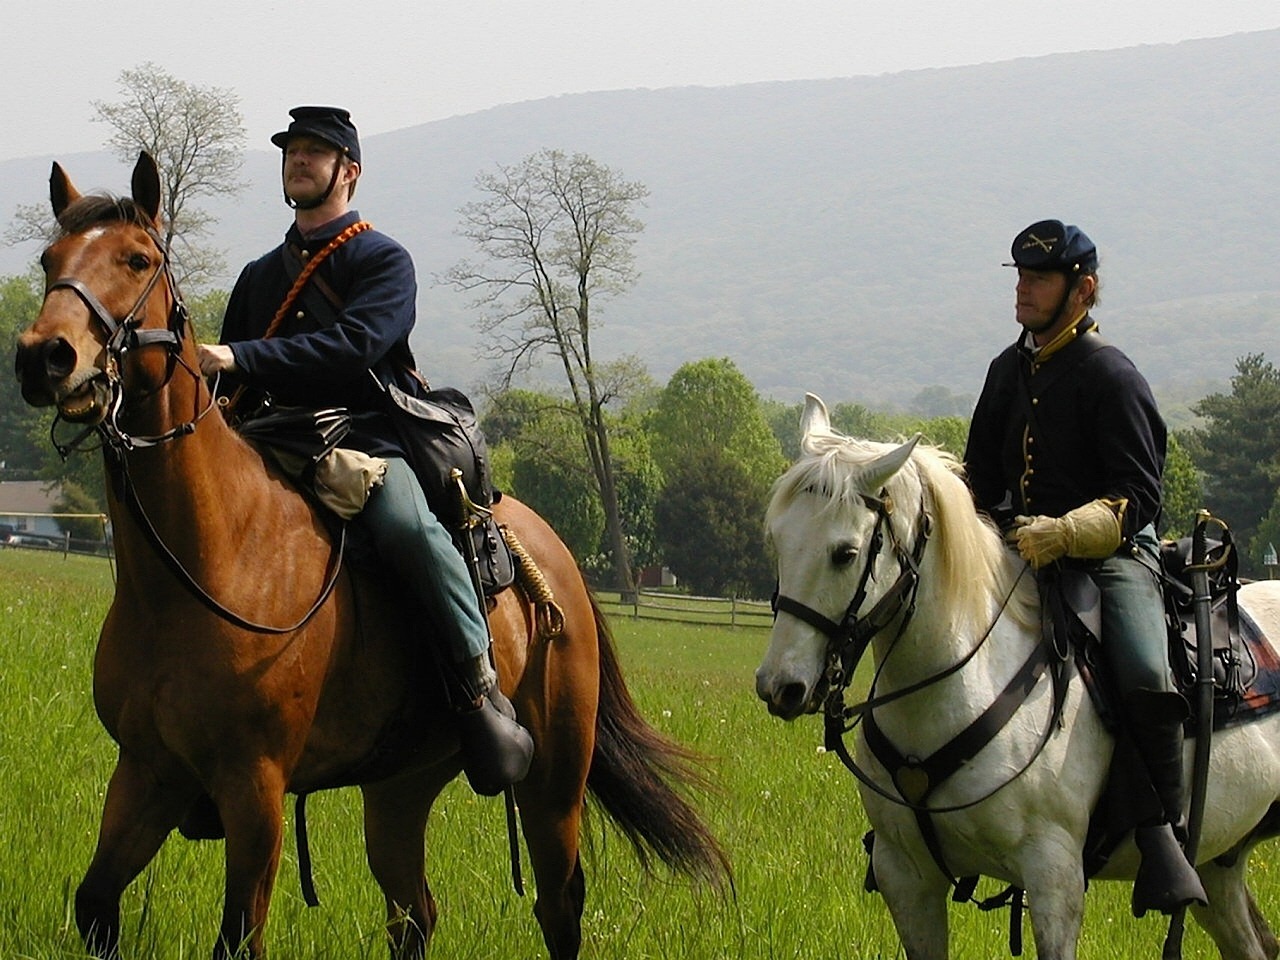 two civil war era soldiers on horses